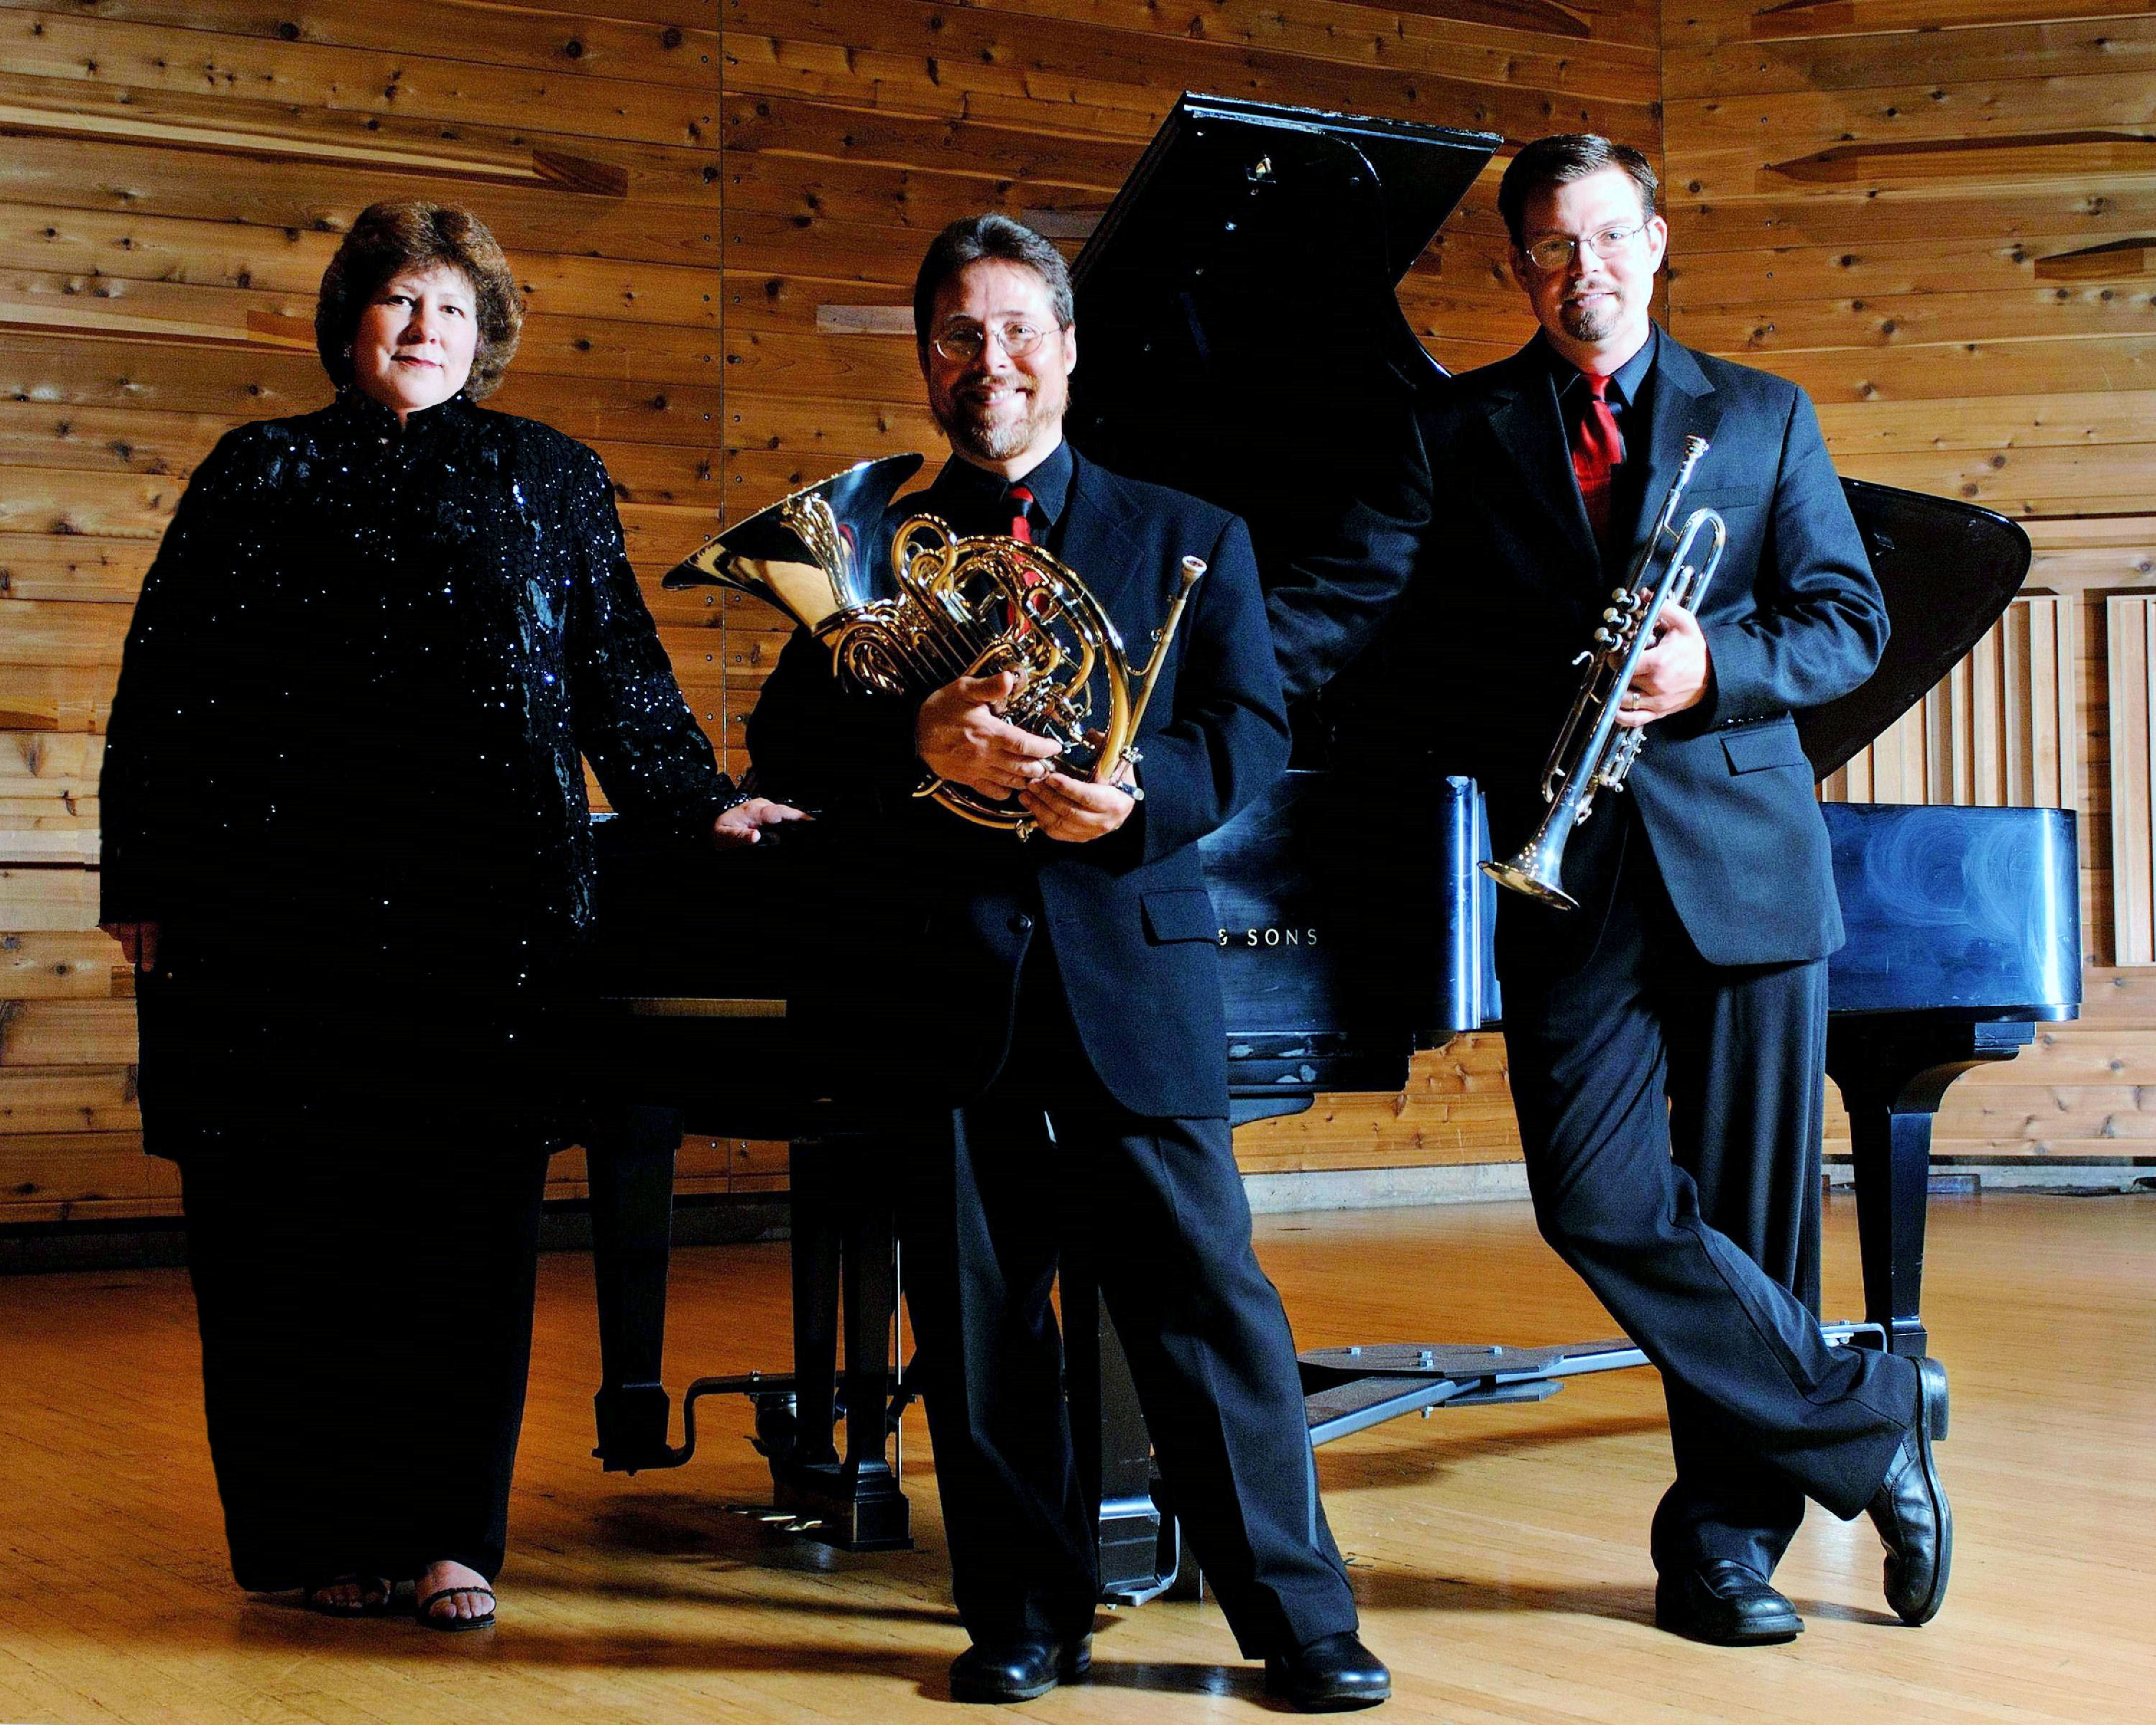 The Brass Roots Trio